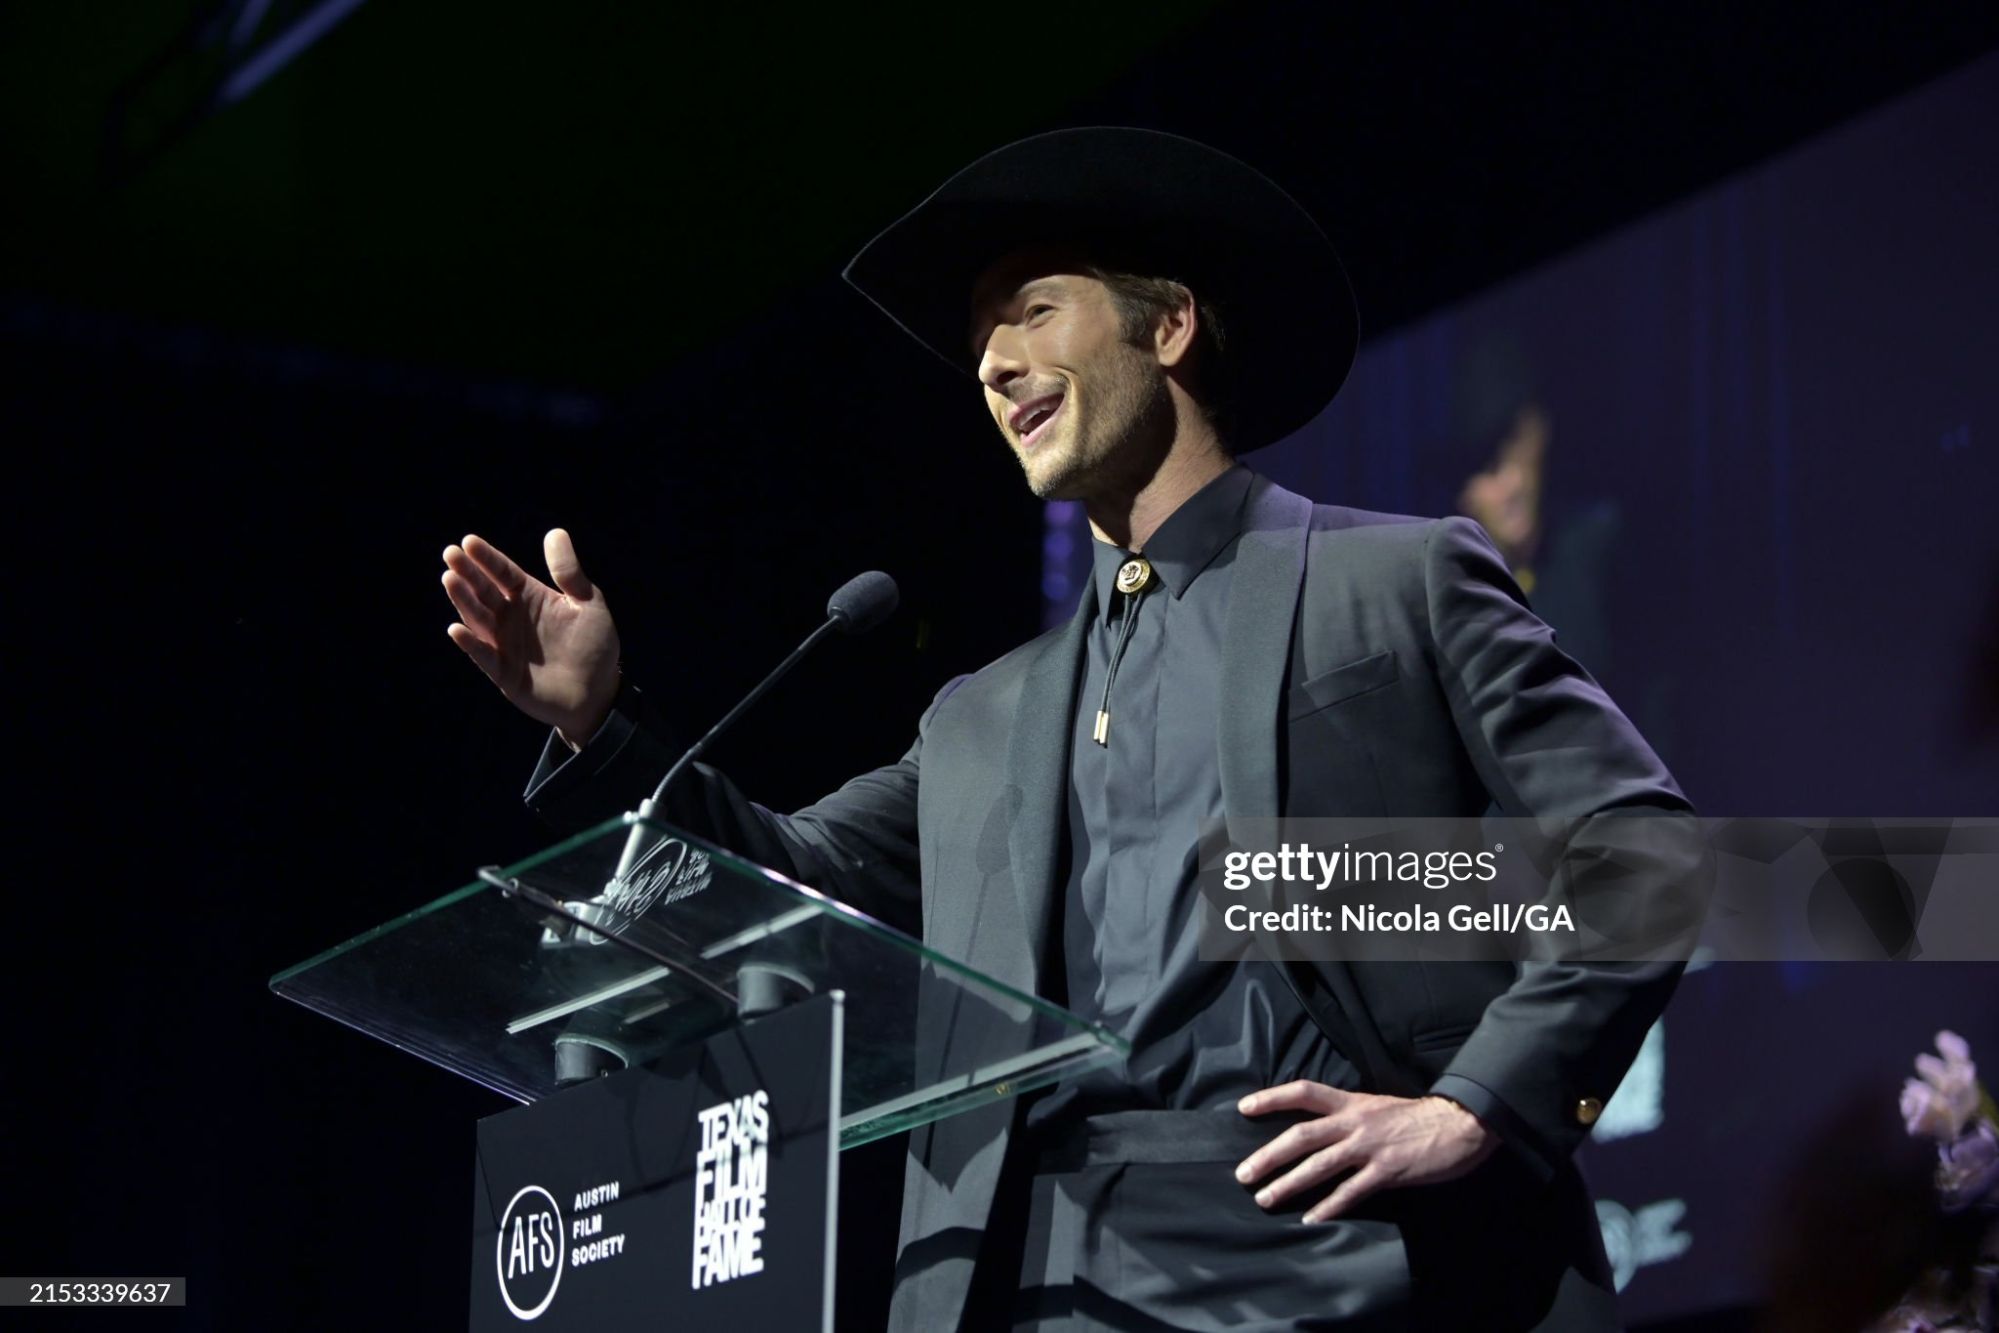 gettyimages-2153339637-2048x2048.jpg